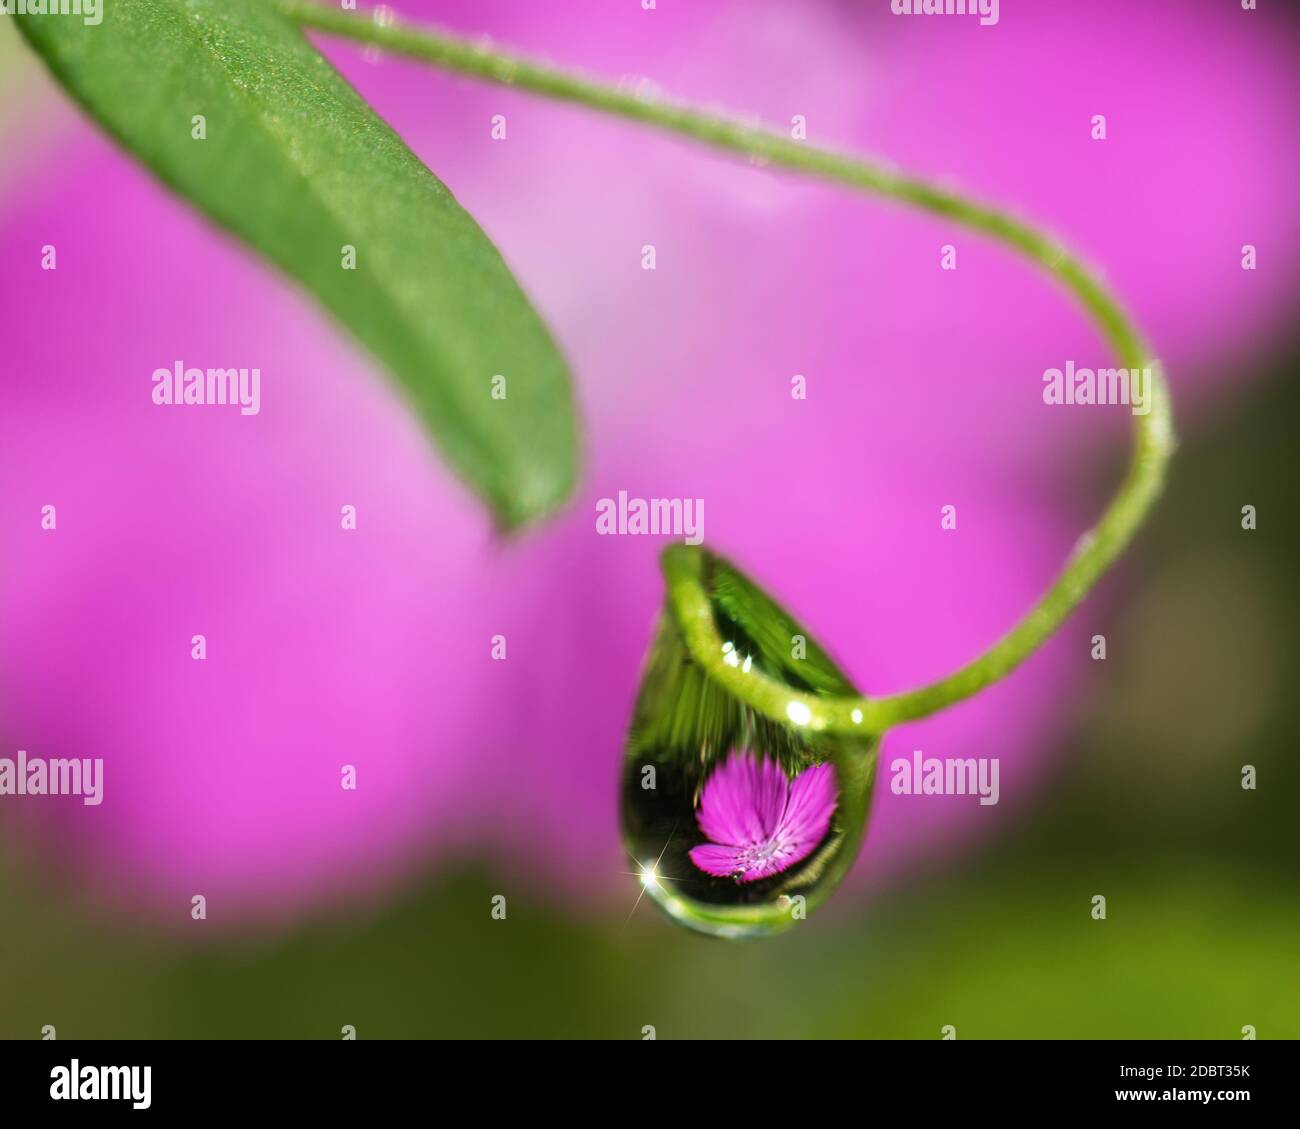 a drop of water on the tendril of a plant with a reflection of a pink flower in it Stock Photo